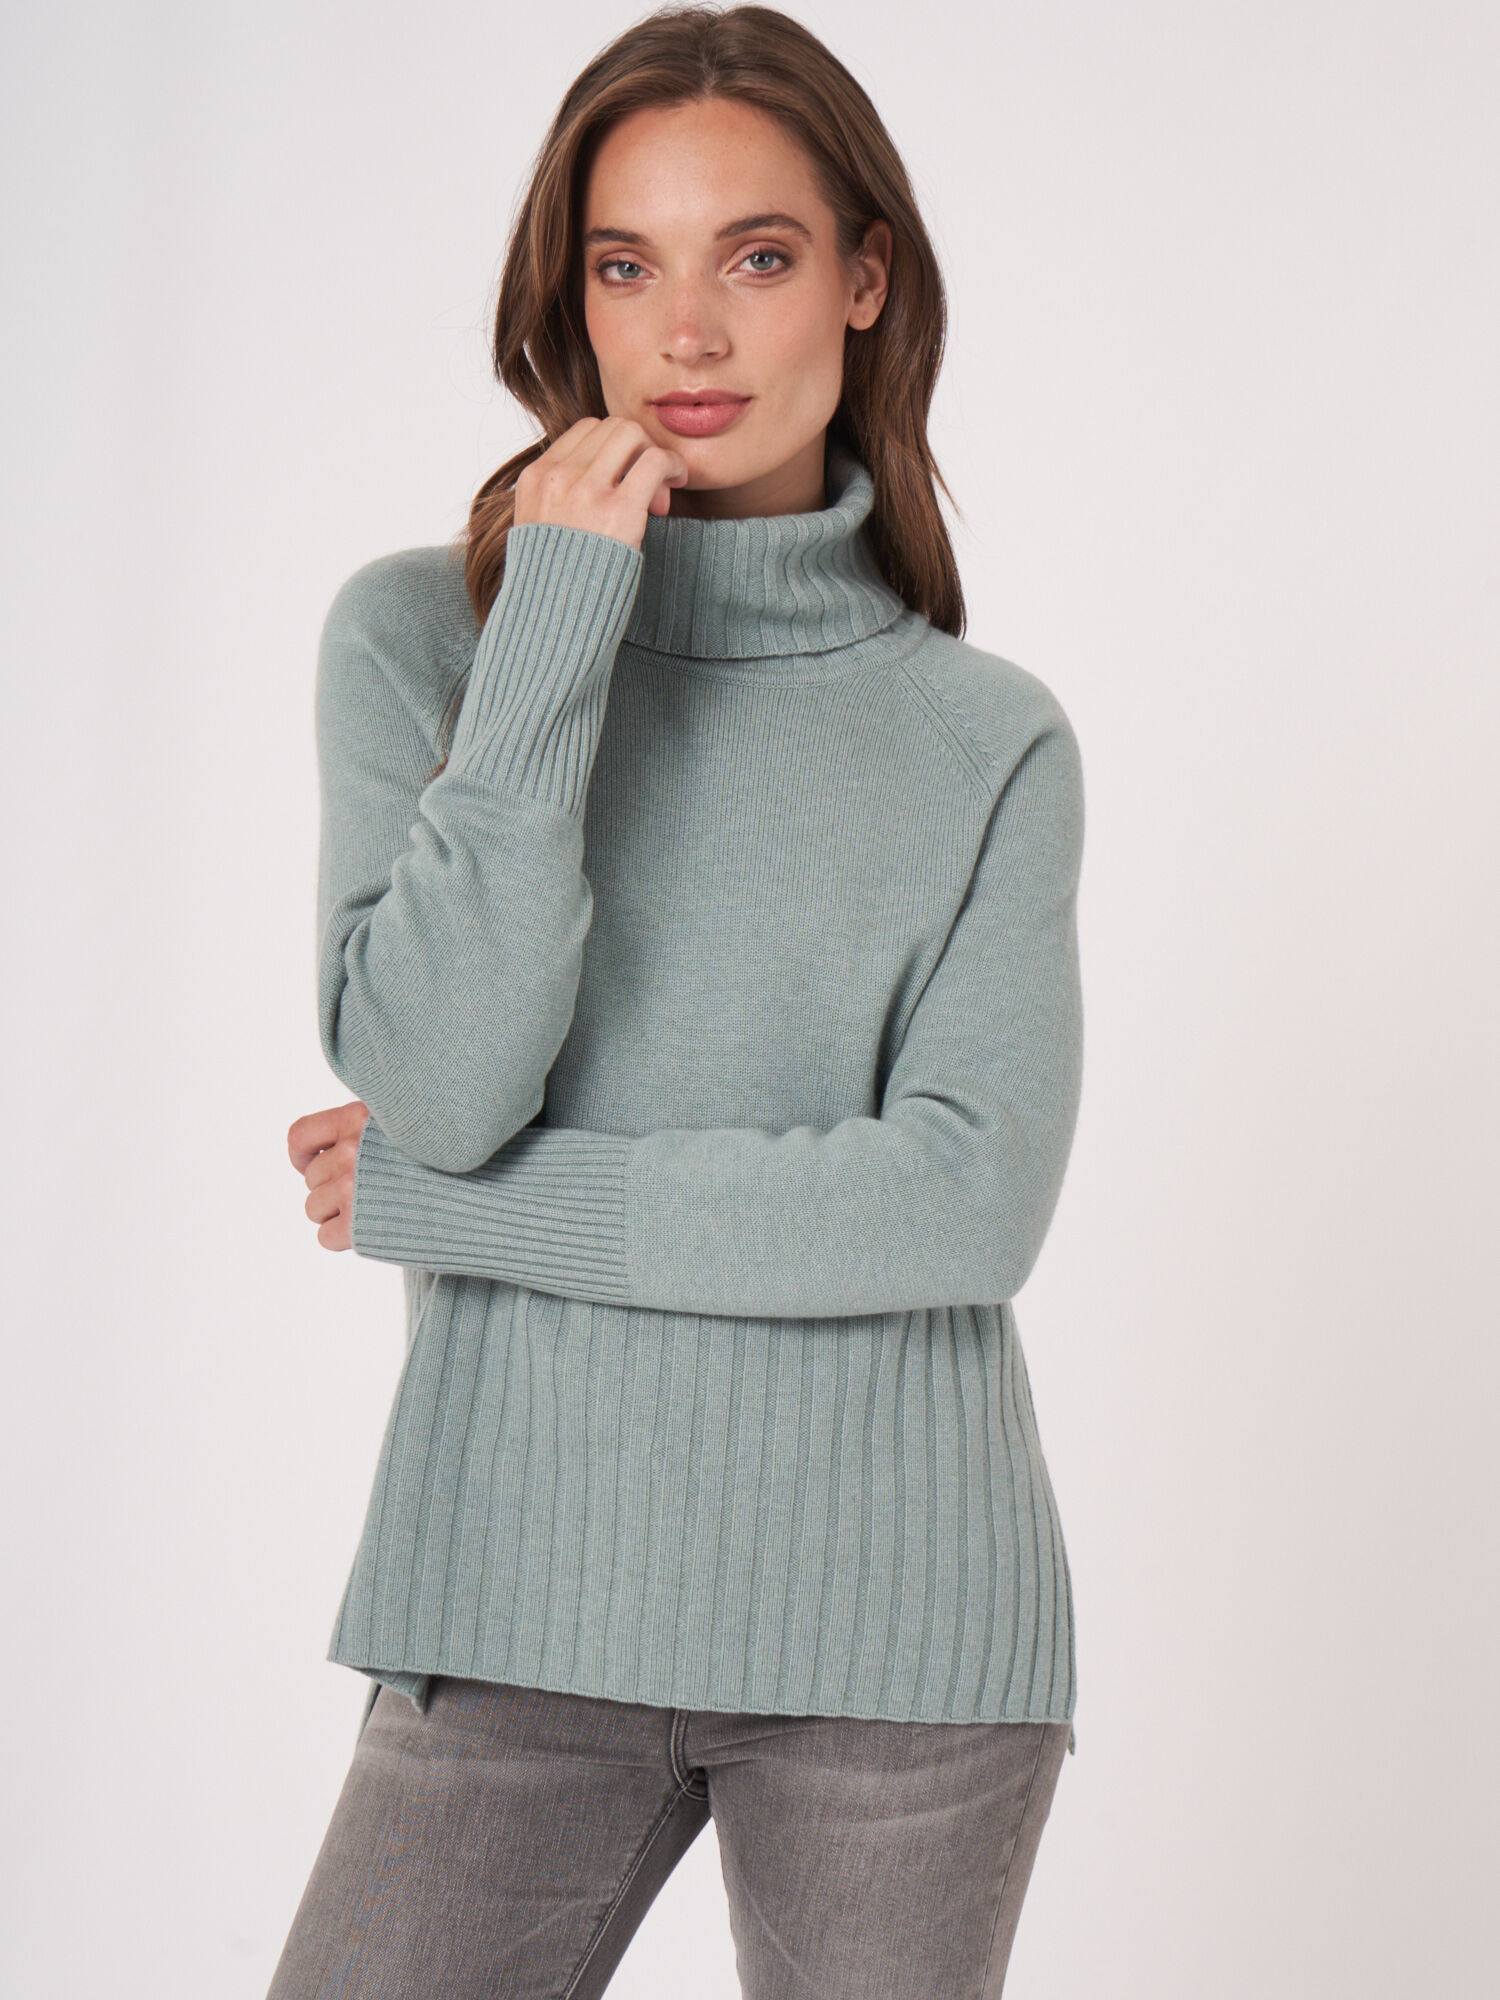 Wide ribbed turtleneck sweater